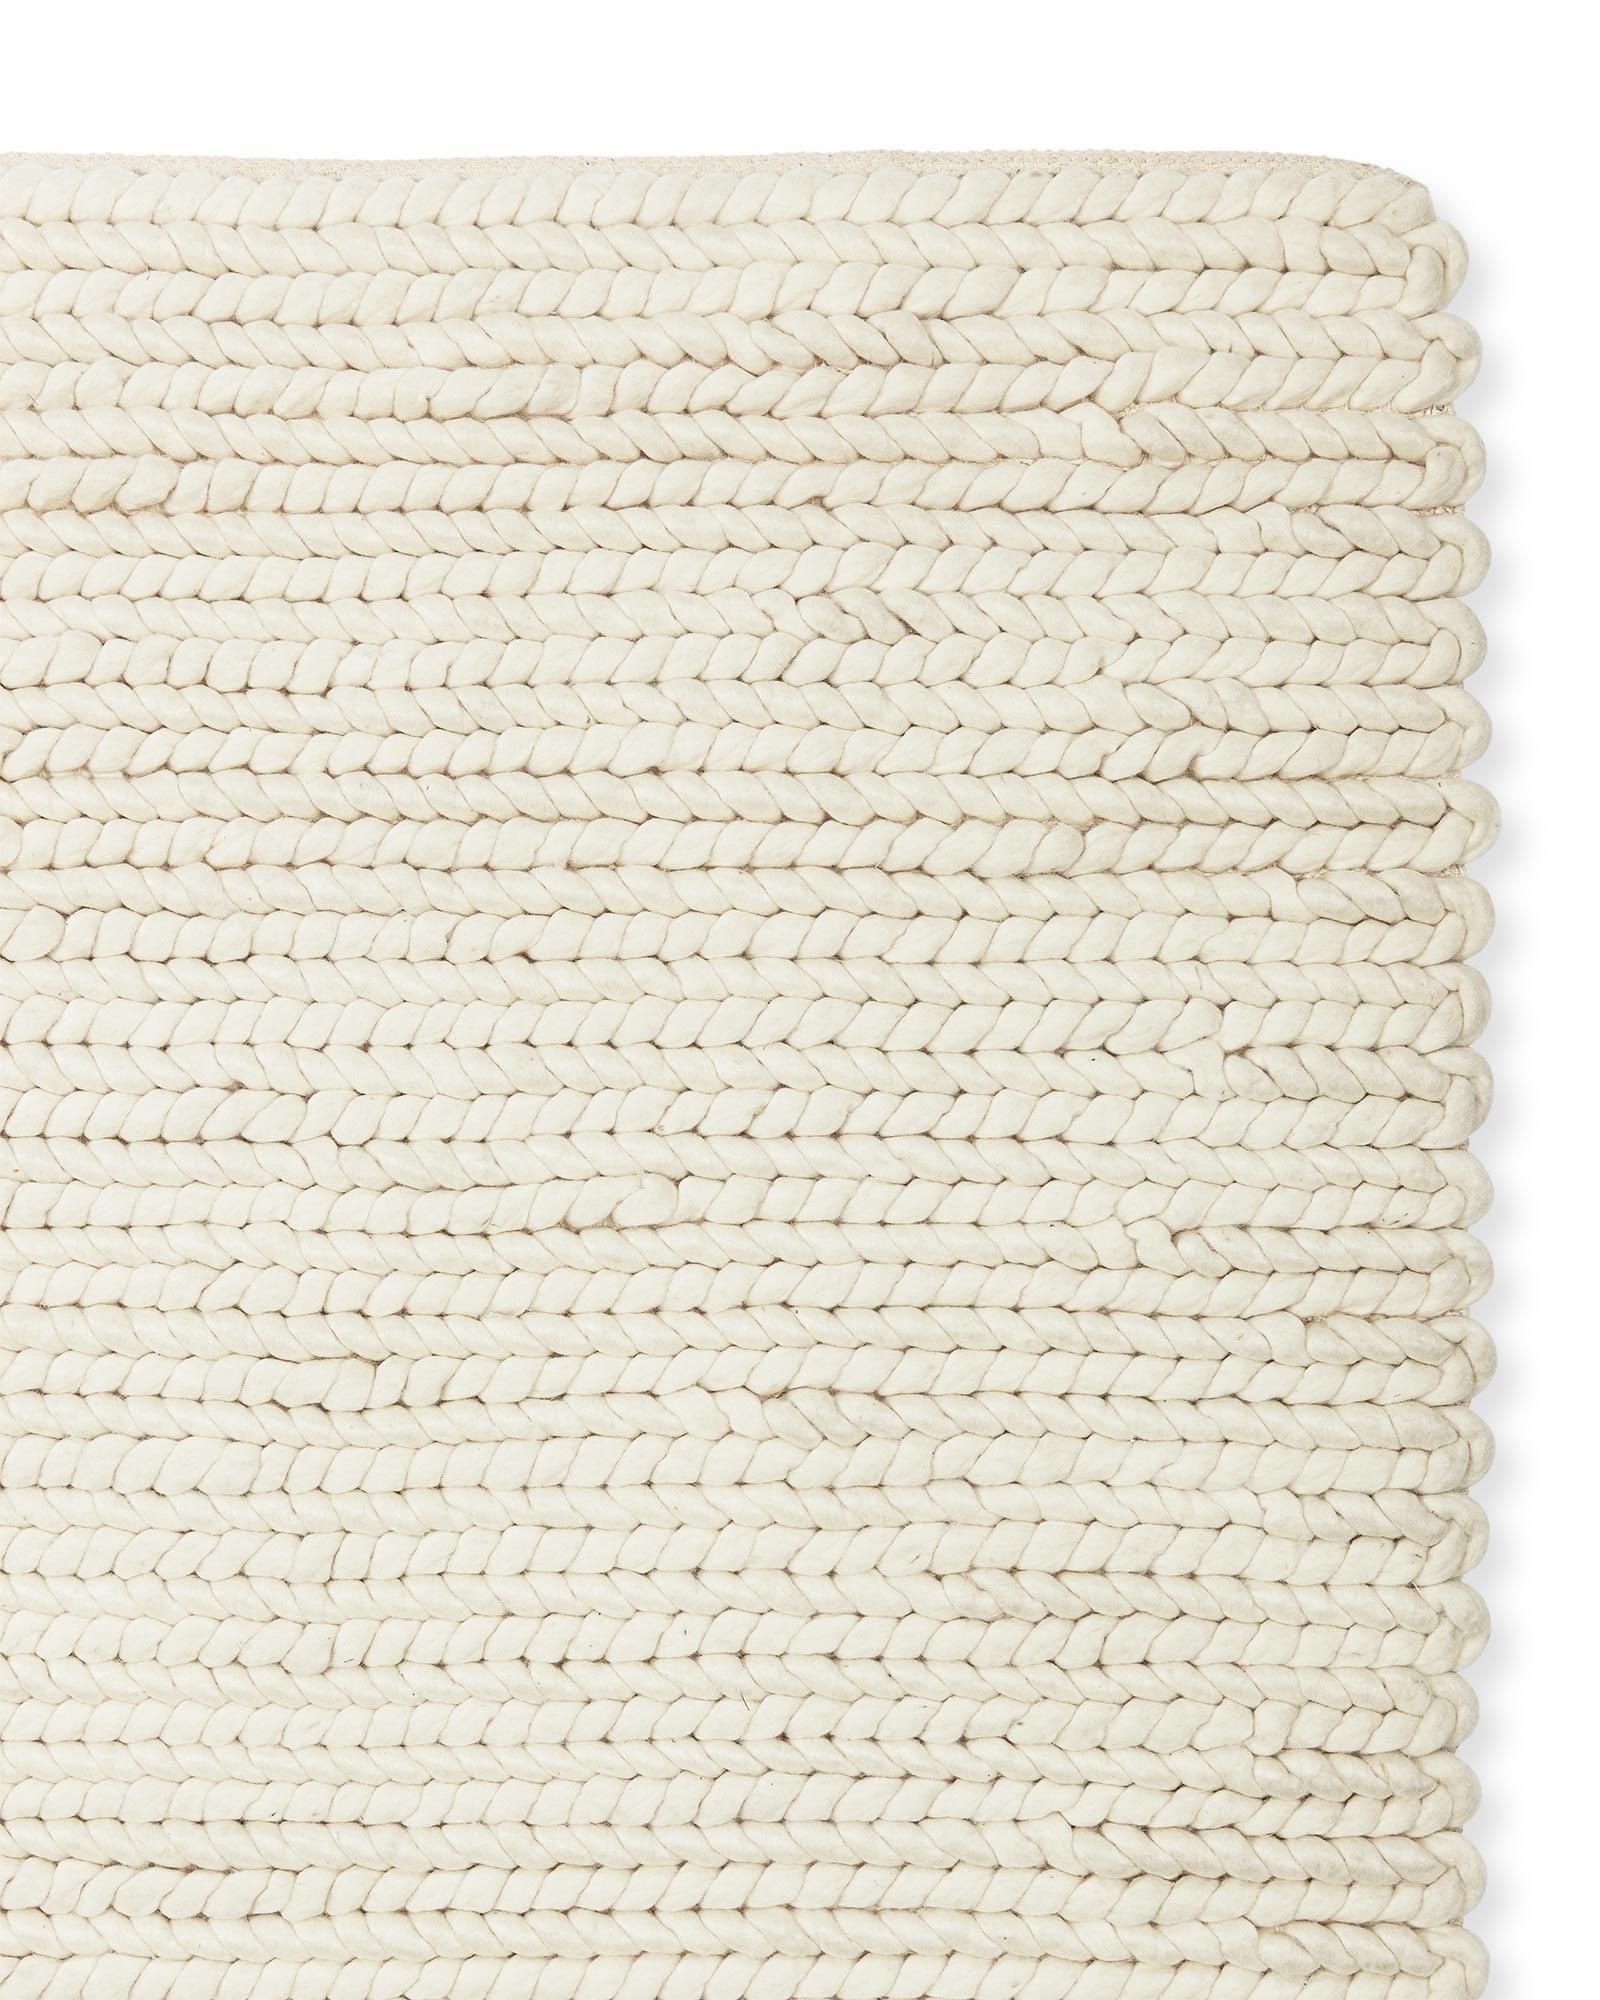 Braided Wool Rug | Serena and Lily